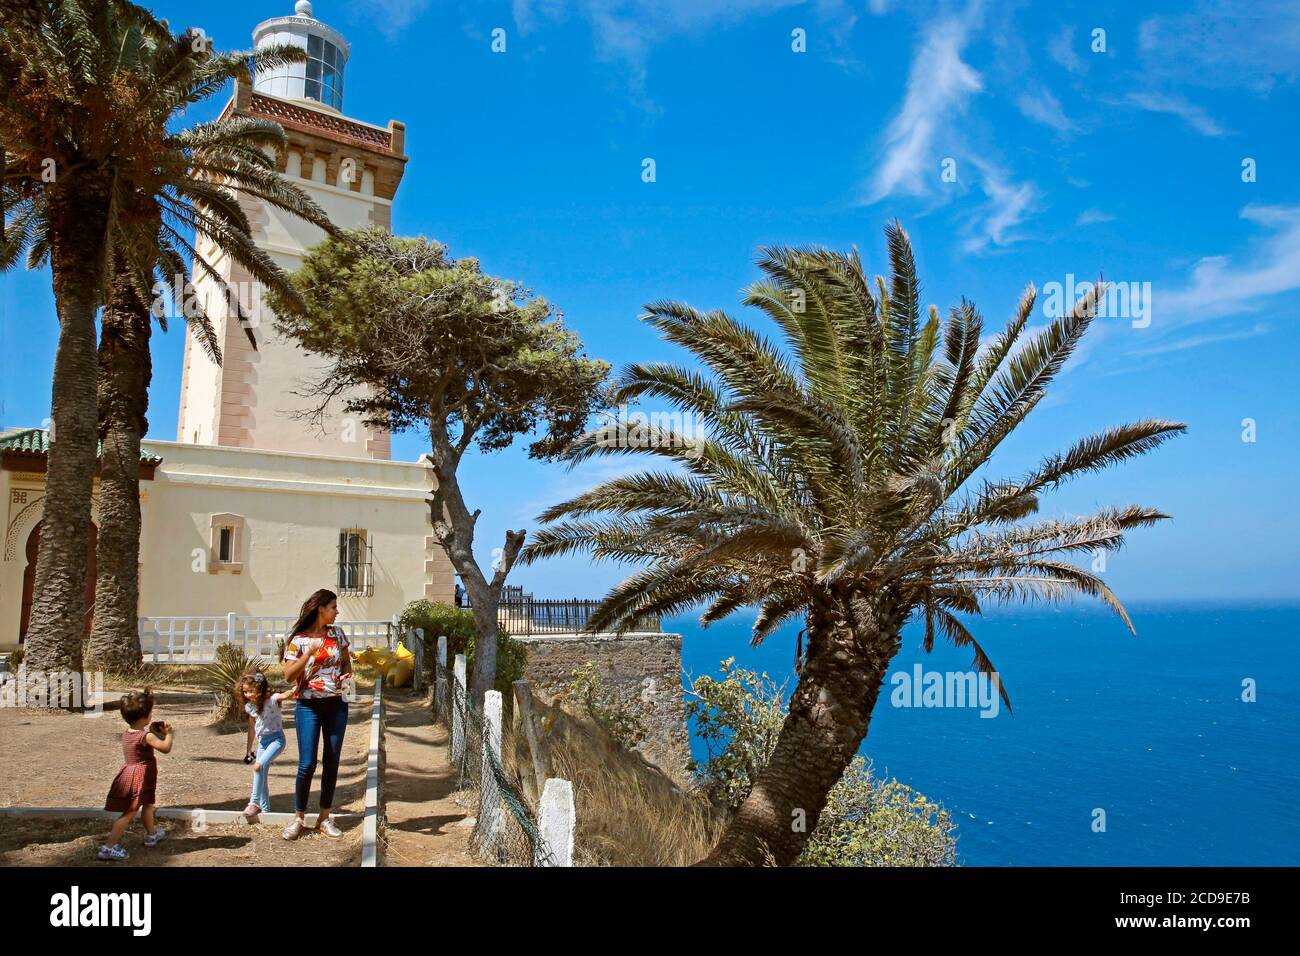 Morocco, Tangier Tetouan region, Tangier, Moroccan woman and her children at the foot of the cape spartel lighthouse overlooking the Mediterranean Stock Photo